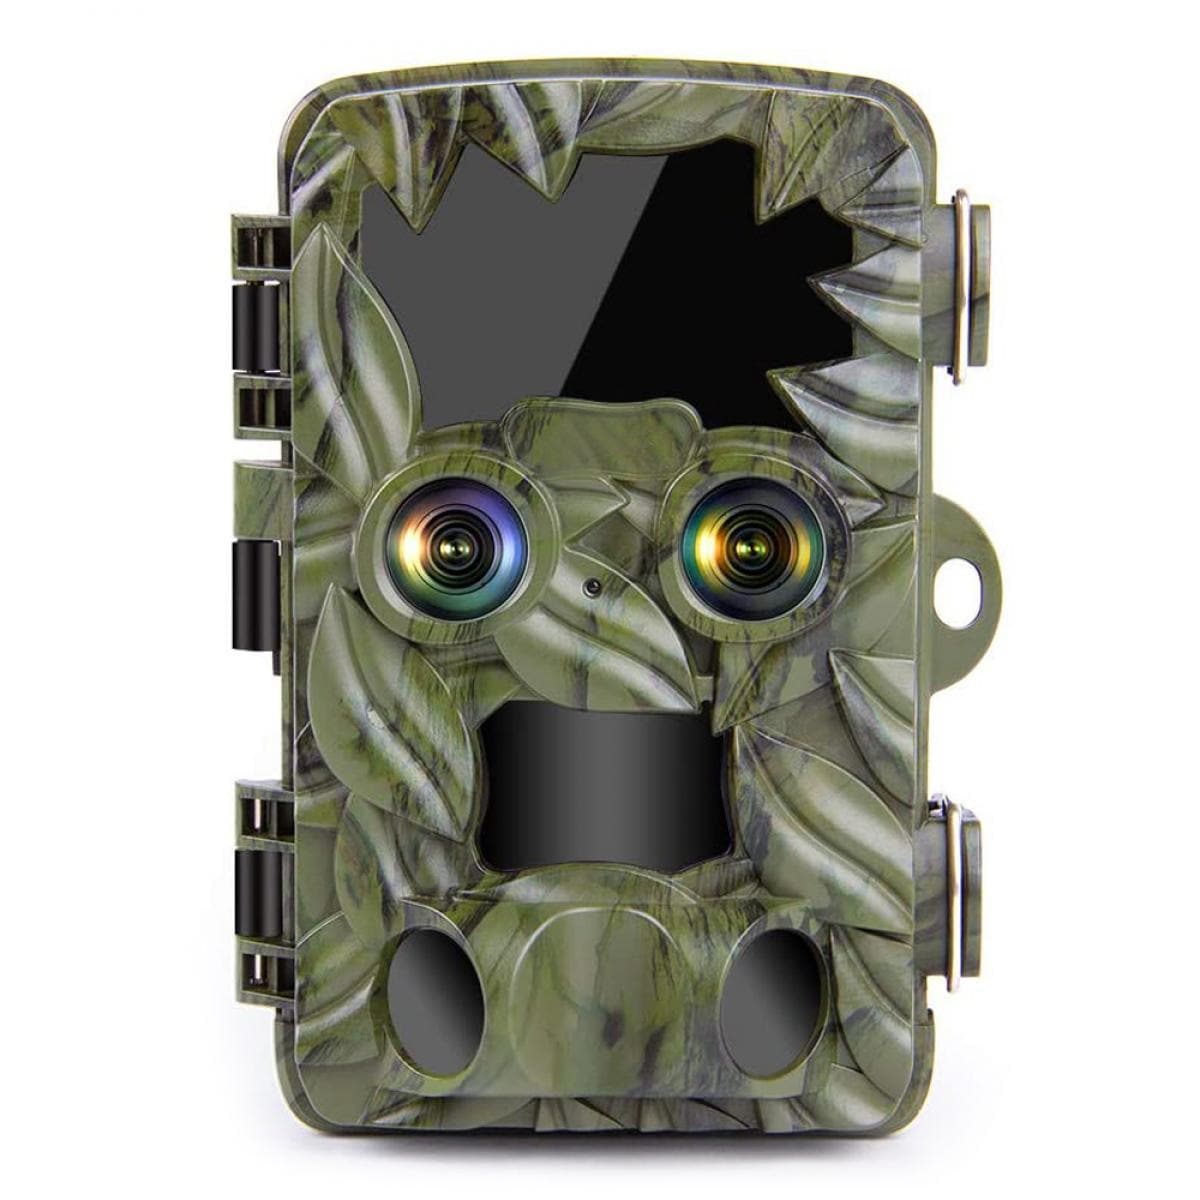 K&F Concept H8201 Trail Camera Dual-Lens with Starlight Night Vision, 4K Wildlife Camera, Activated Game Camera for Hunting Outdoor Wildlife Monitoring